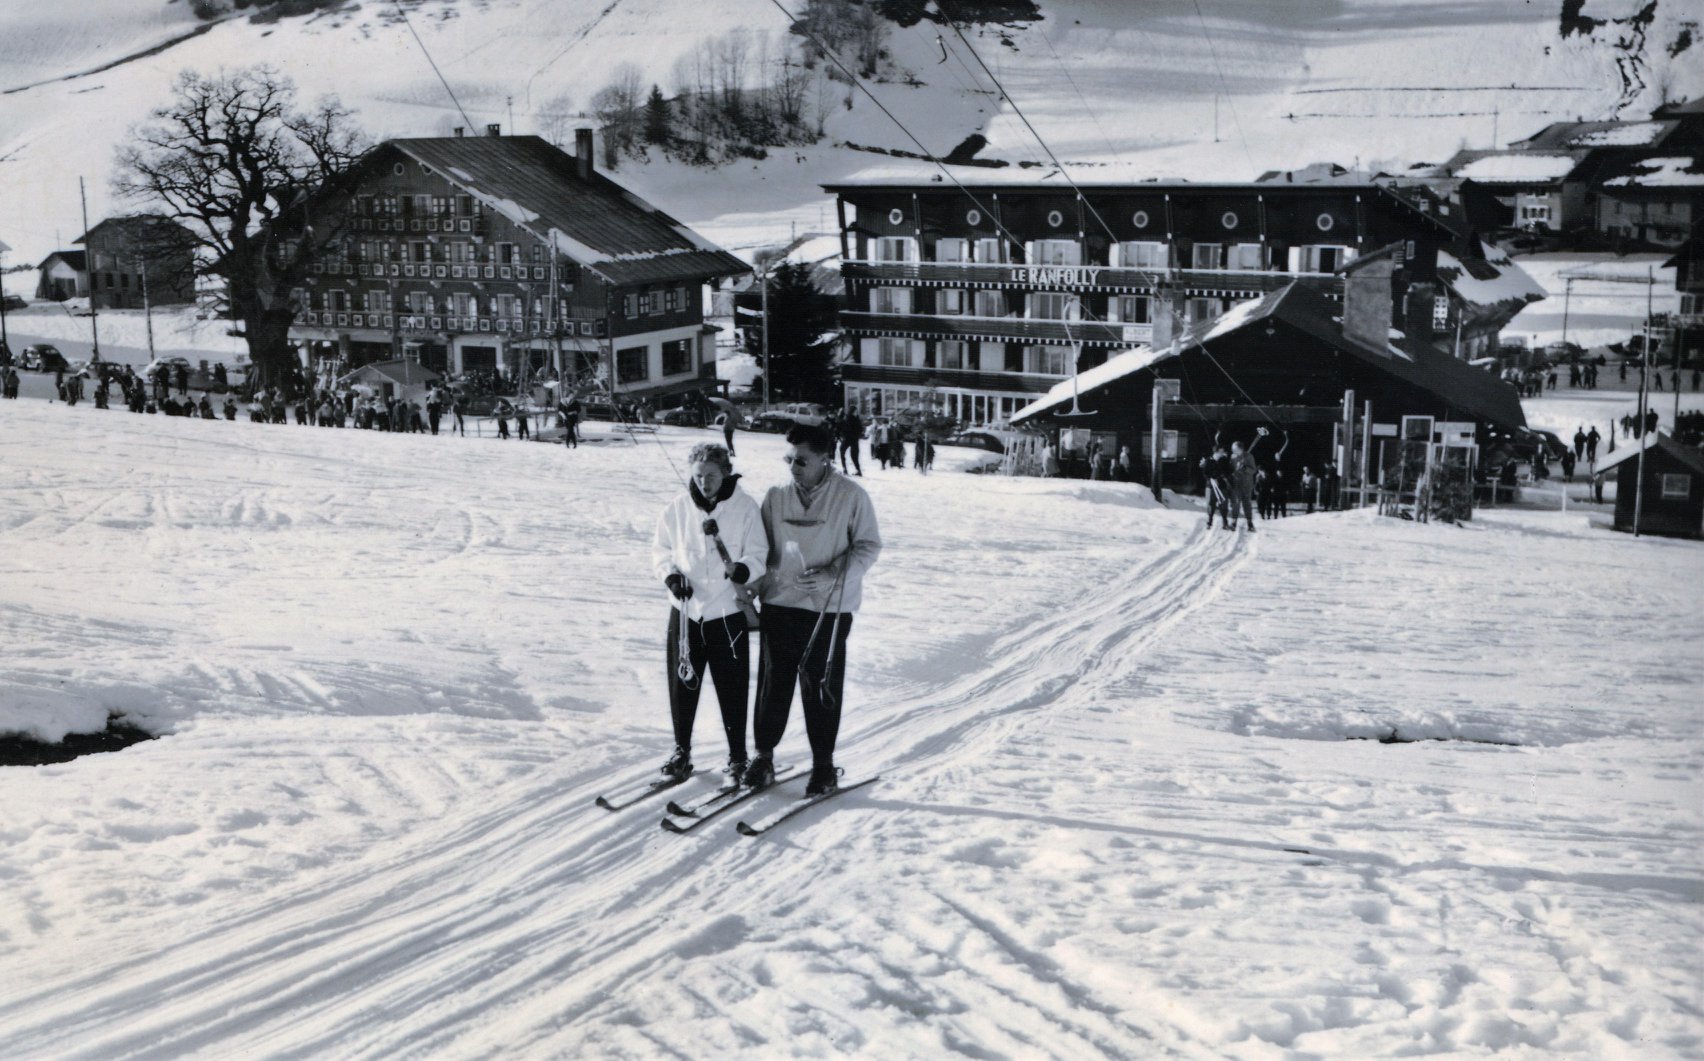 Les Gets – 90 years on the slopes